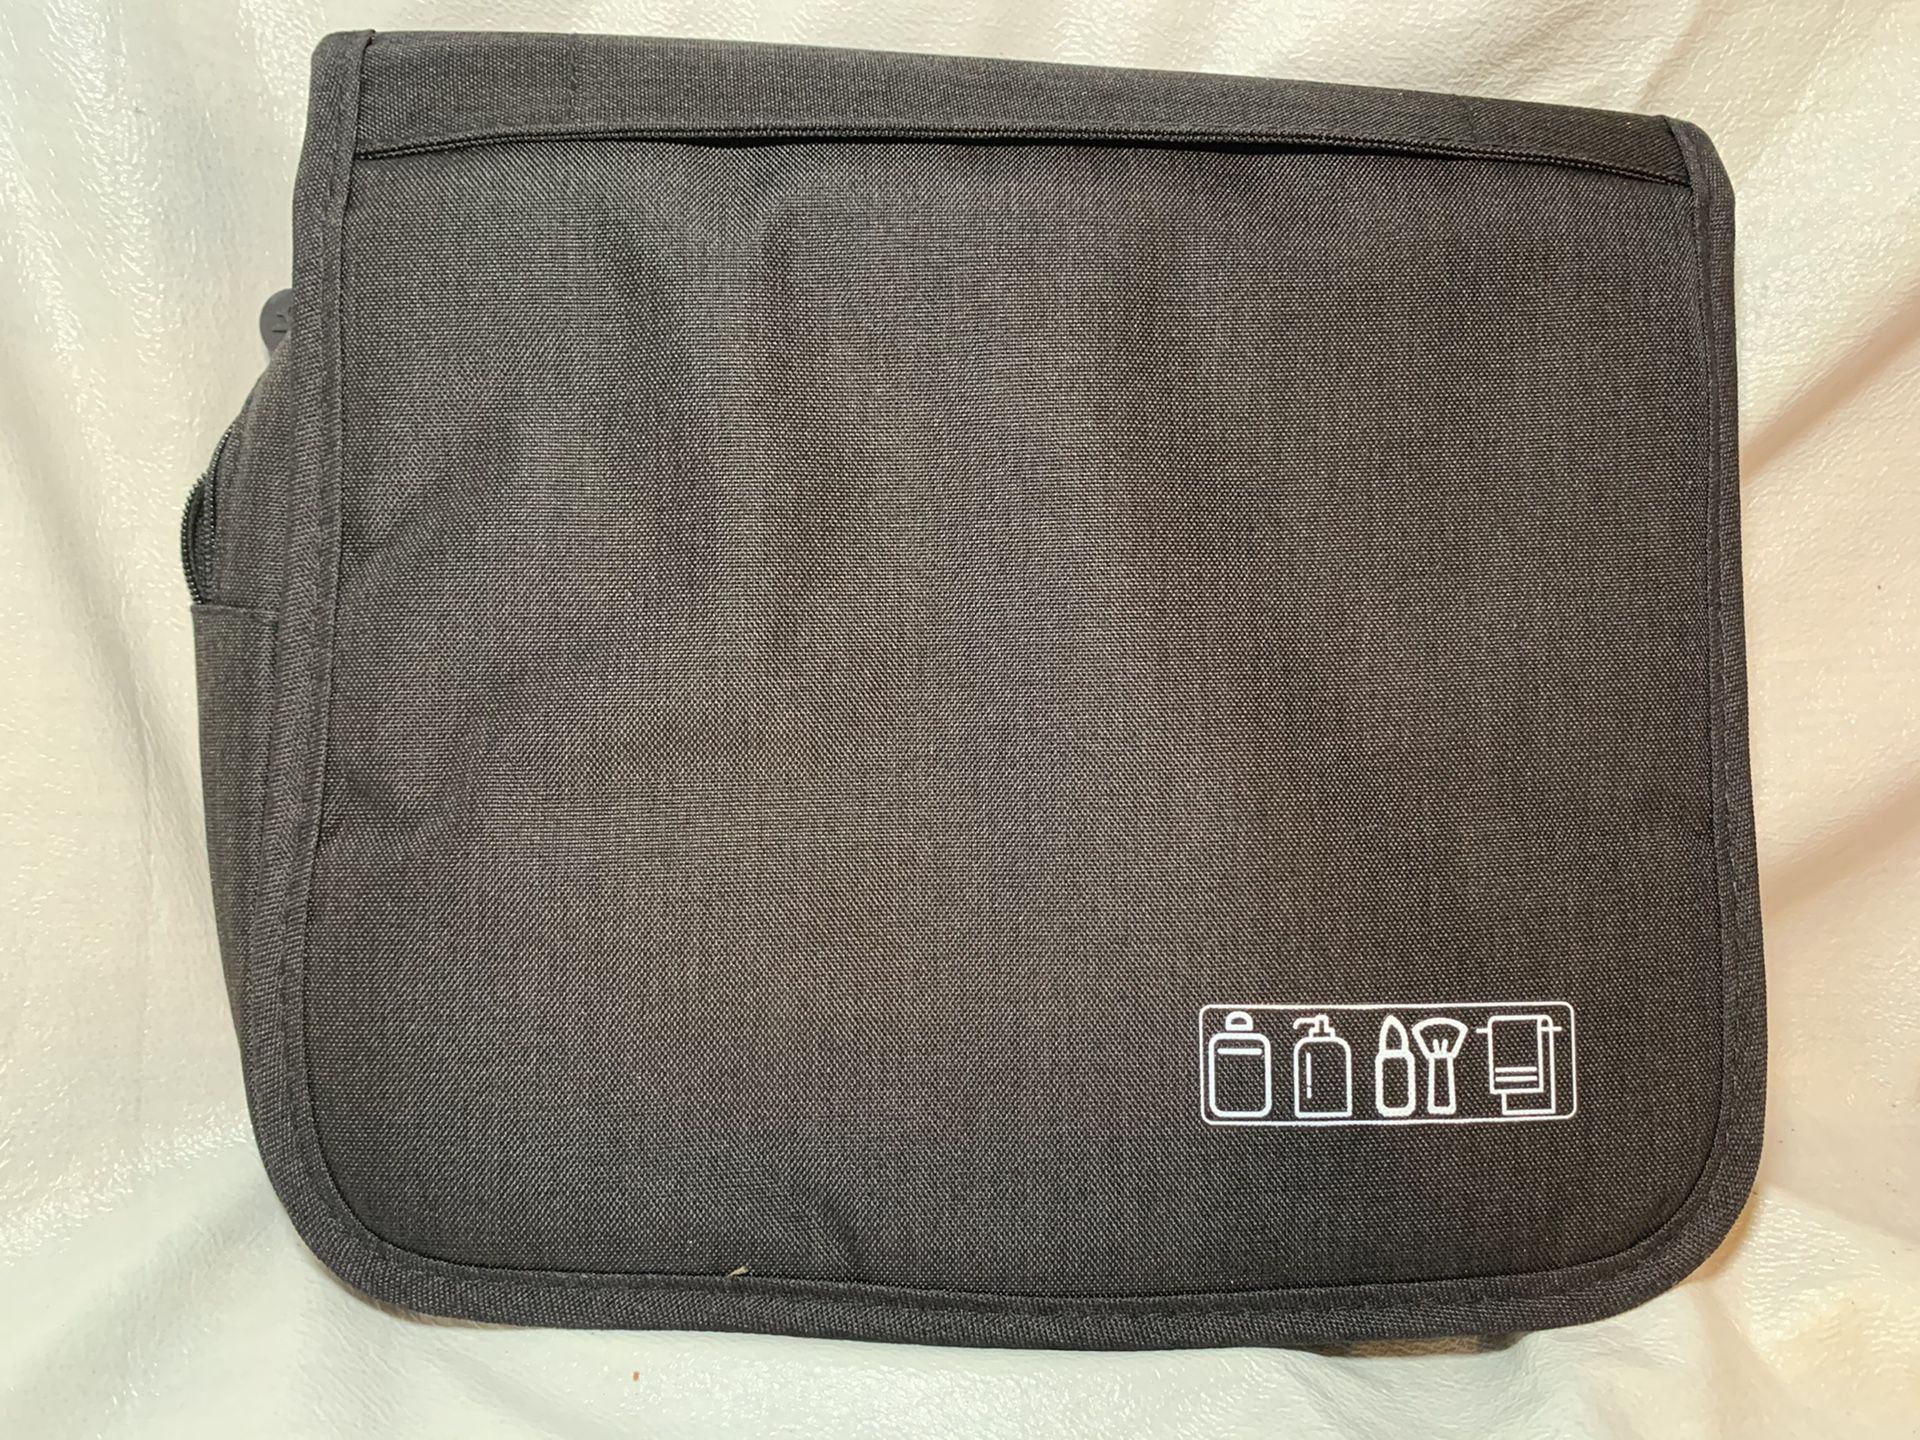 Hanging Travel Toiletry Bag. New!